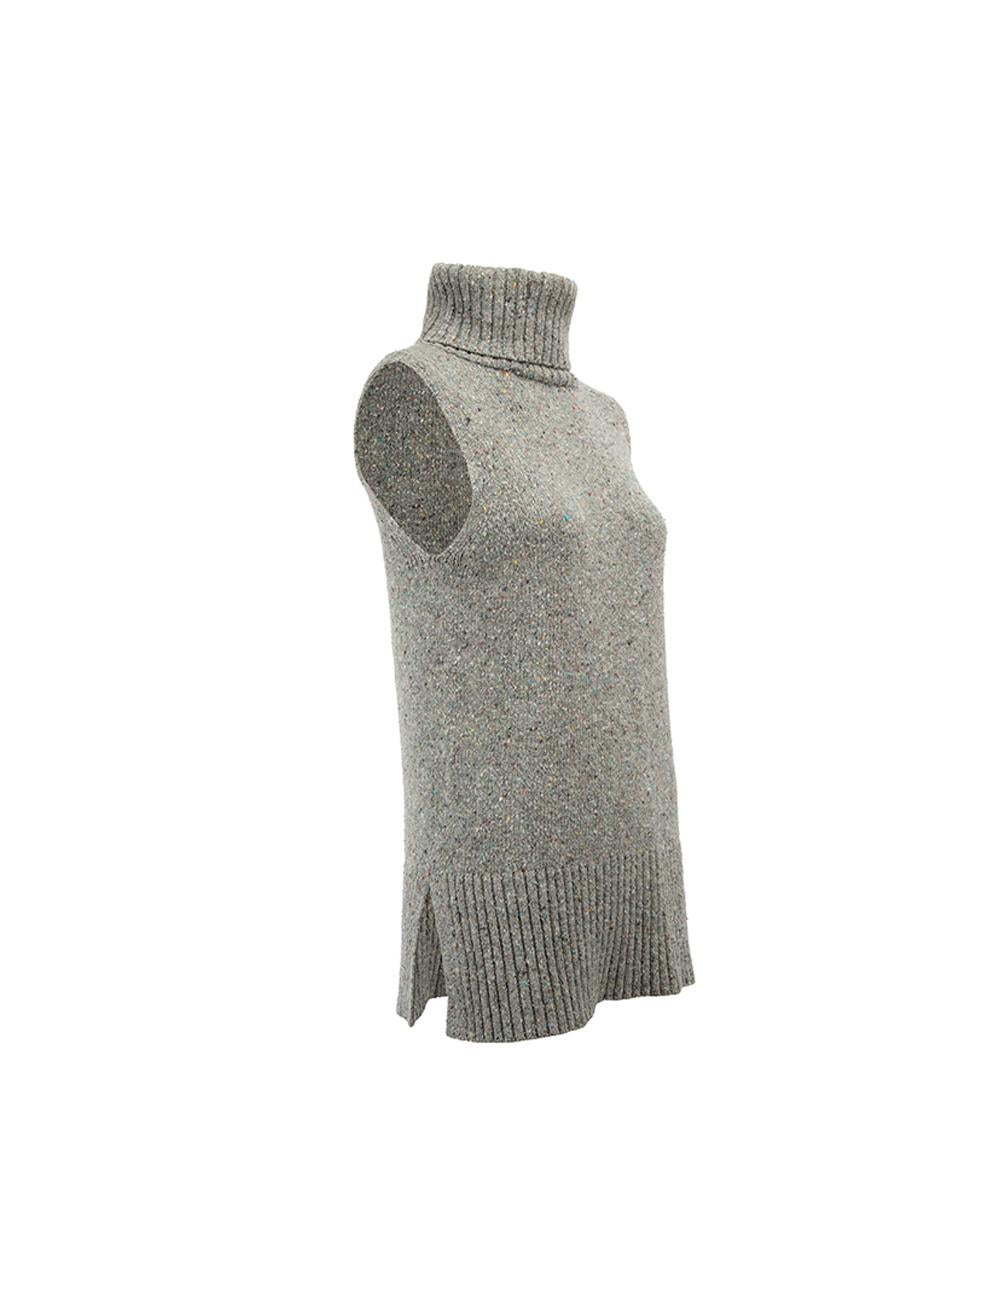 CONDITION is Very good. Hardly any visible wear to top is evident on this used Club Monaco designer resale item. 
 
 Details
  Grey
 Wool
 Knitted sleeveless vest
 Turtleneck
 Side slits
 
 
 Made in China
 
 Composition
 59% Wool, 21% Nylon and 20%